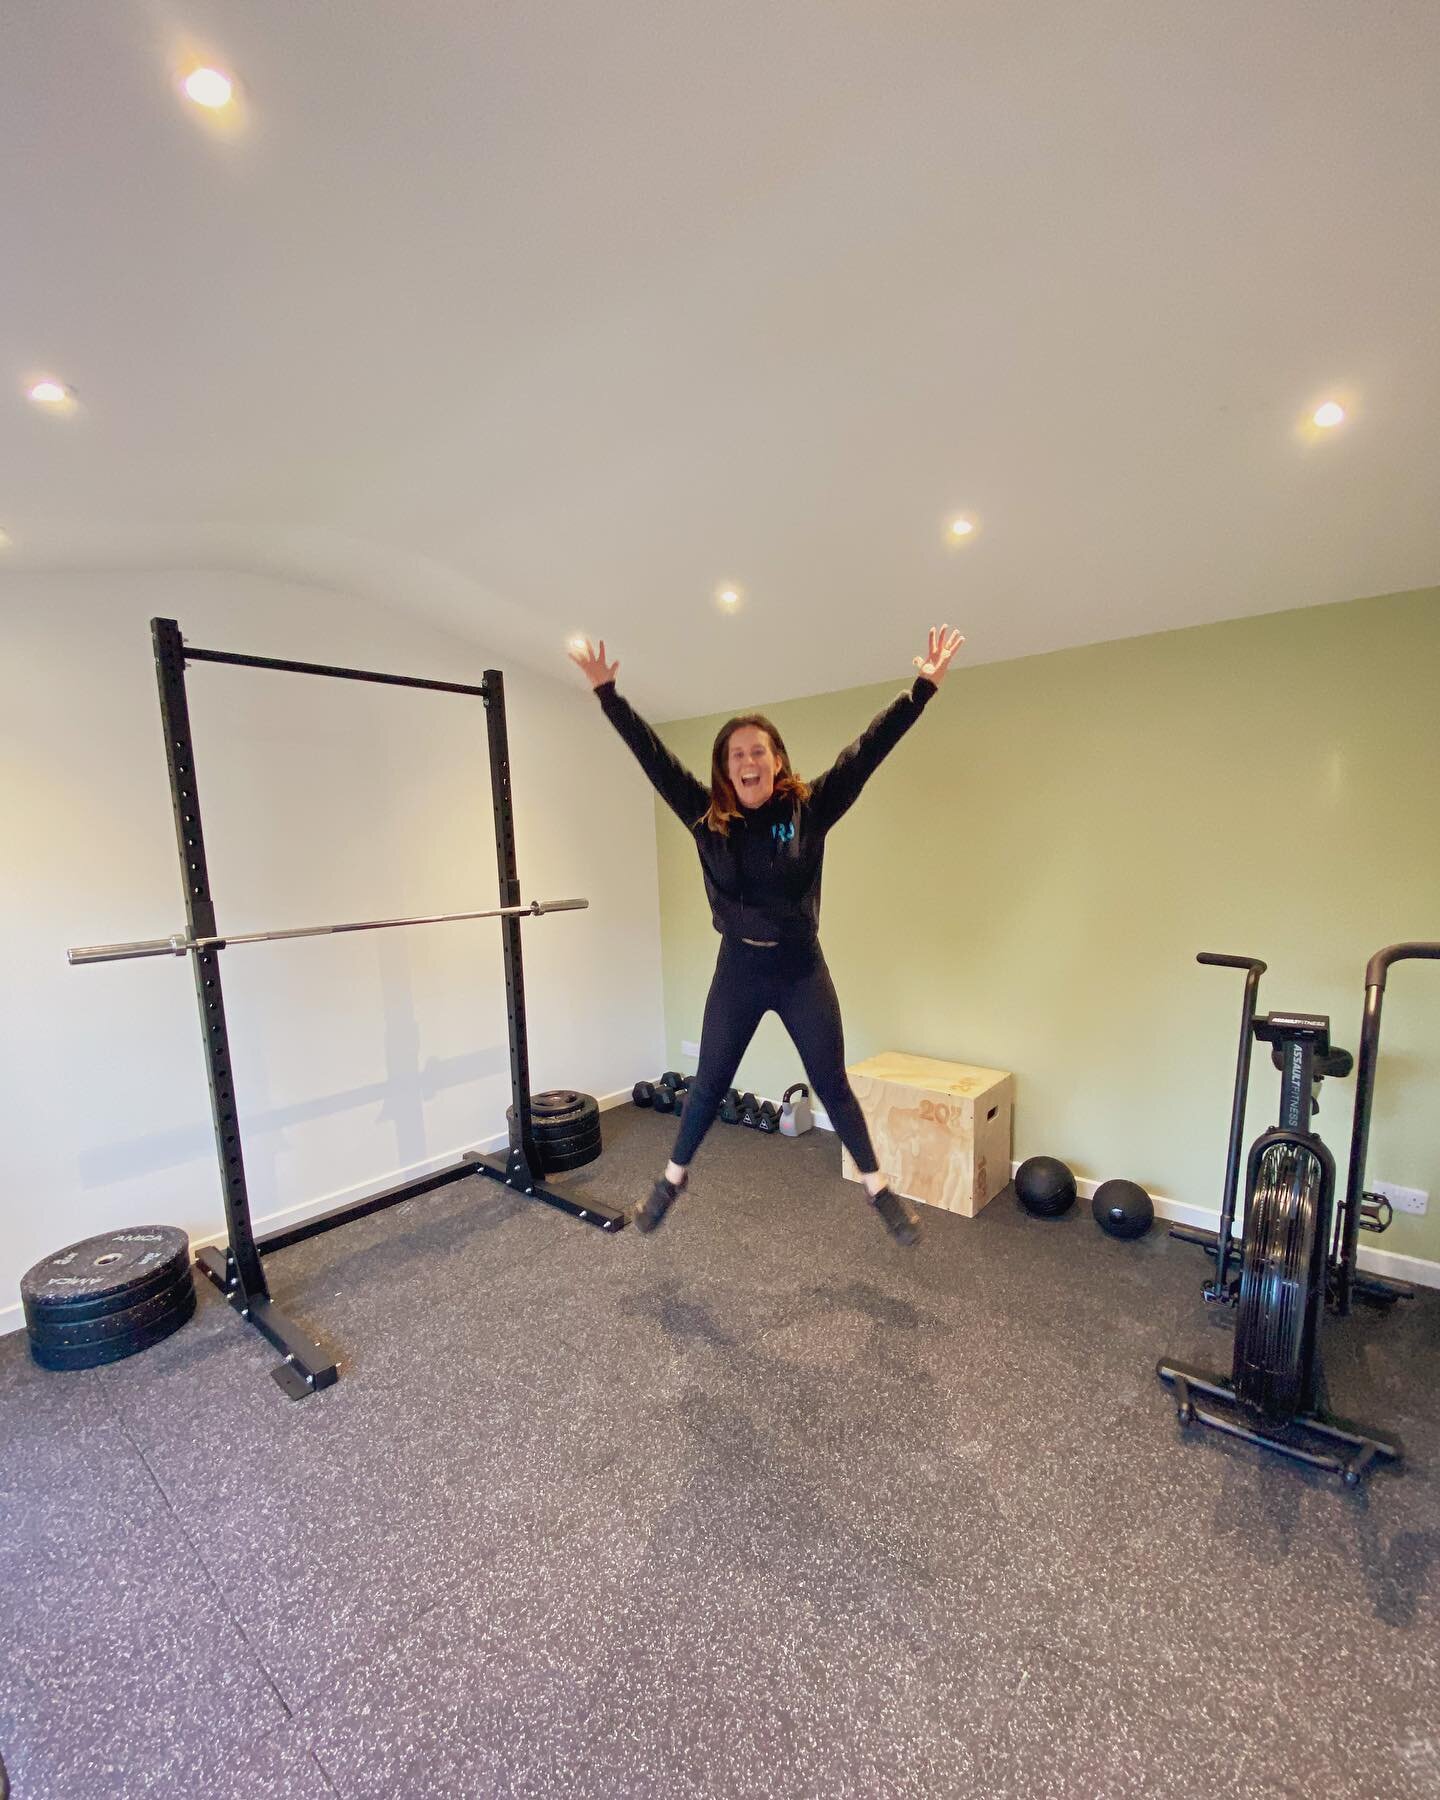 HAPPY GYM EVE! 🥳 Honestly can&rsquo;t believe we&rsquo;re here. 3 months after completion and I can finally open tomorrow. So excited (incase you couldn&rsquo;t tell!) 🏋🏻&zwj;♀️

Swipe/scroll for some before mess 😬

#gym #ukhomegym #gymtime #chri